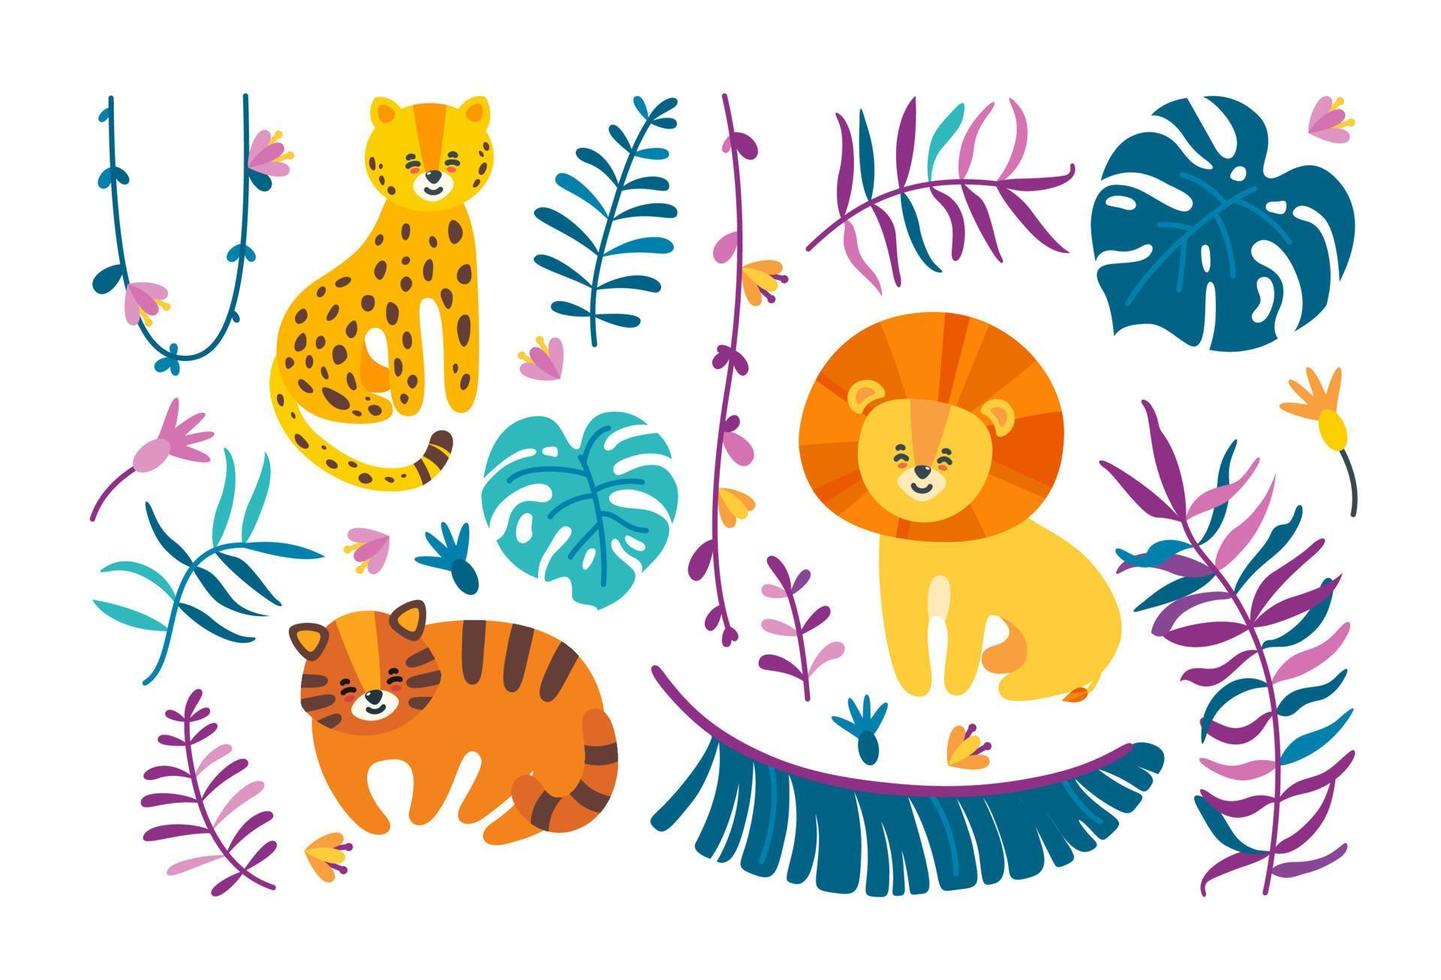 Big cats with jungle leaves and lianas. Leopard, lion and tiger with different plants. Vector illustration